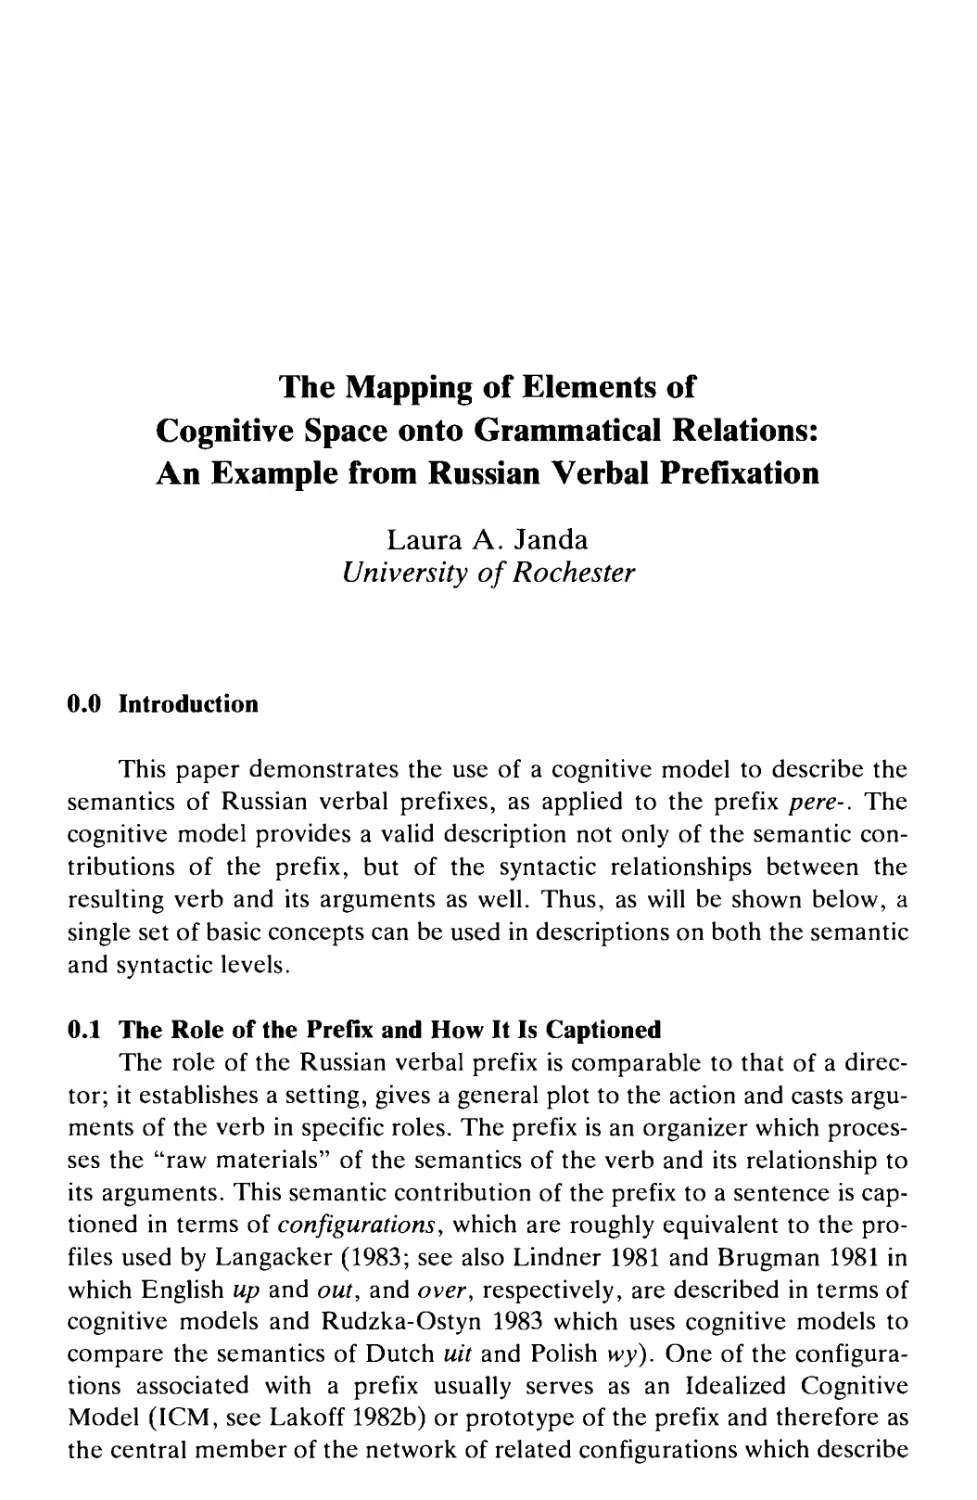 The Mapping of Elements of Cognitive Space onto Grammatical Relations: An Example from Russian Verbal Prefixation
Goto 337 /FitH 555.1 The Role of the Prefix and How It Is Captioned